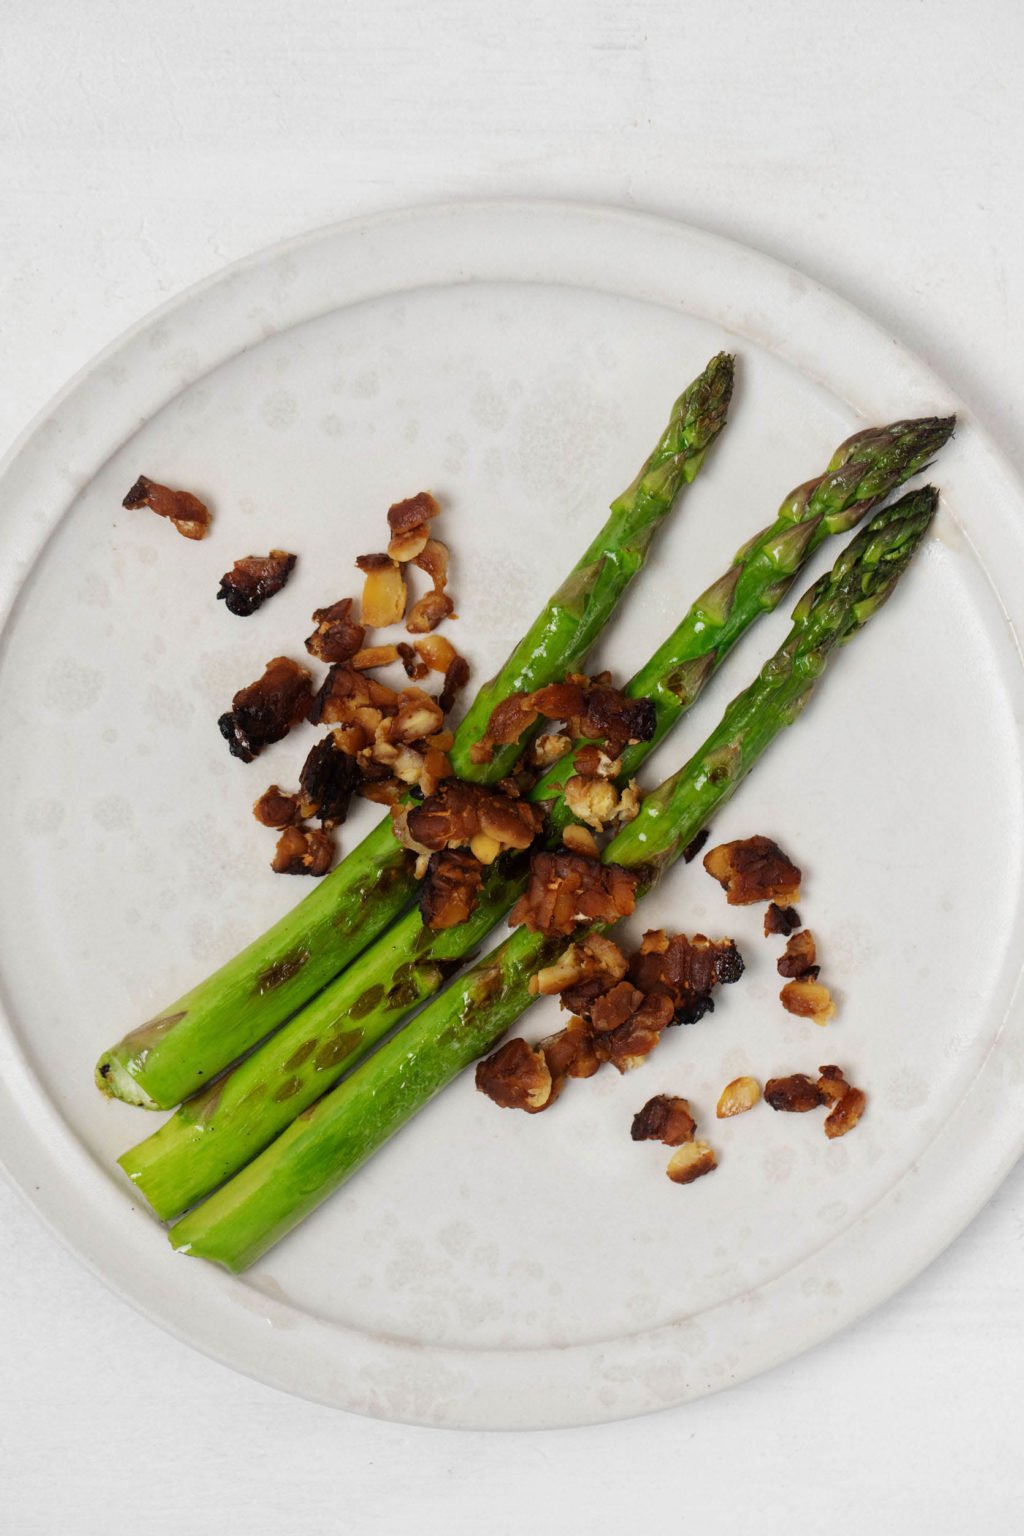 A round, white plate holds freshly cooked asparagus spears. It rests on a white surface.